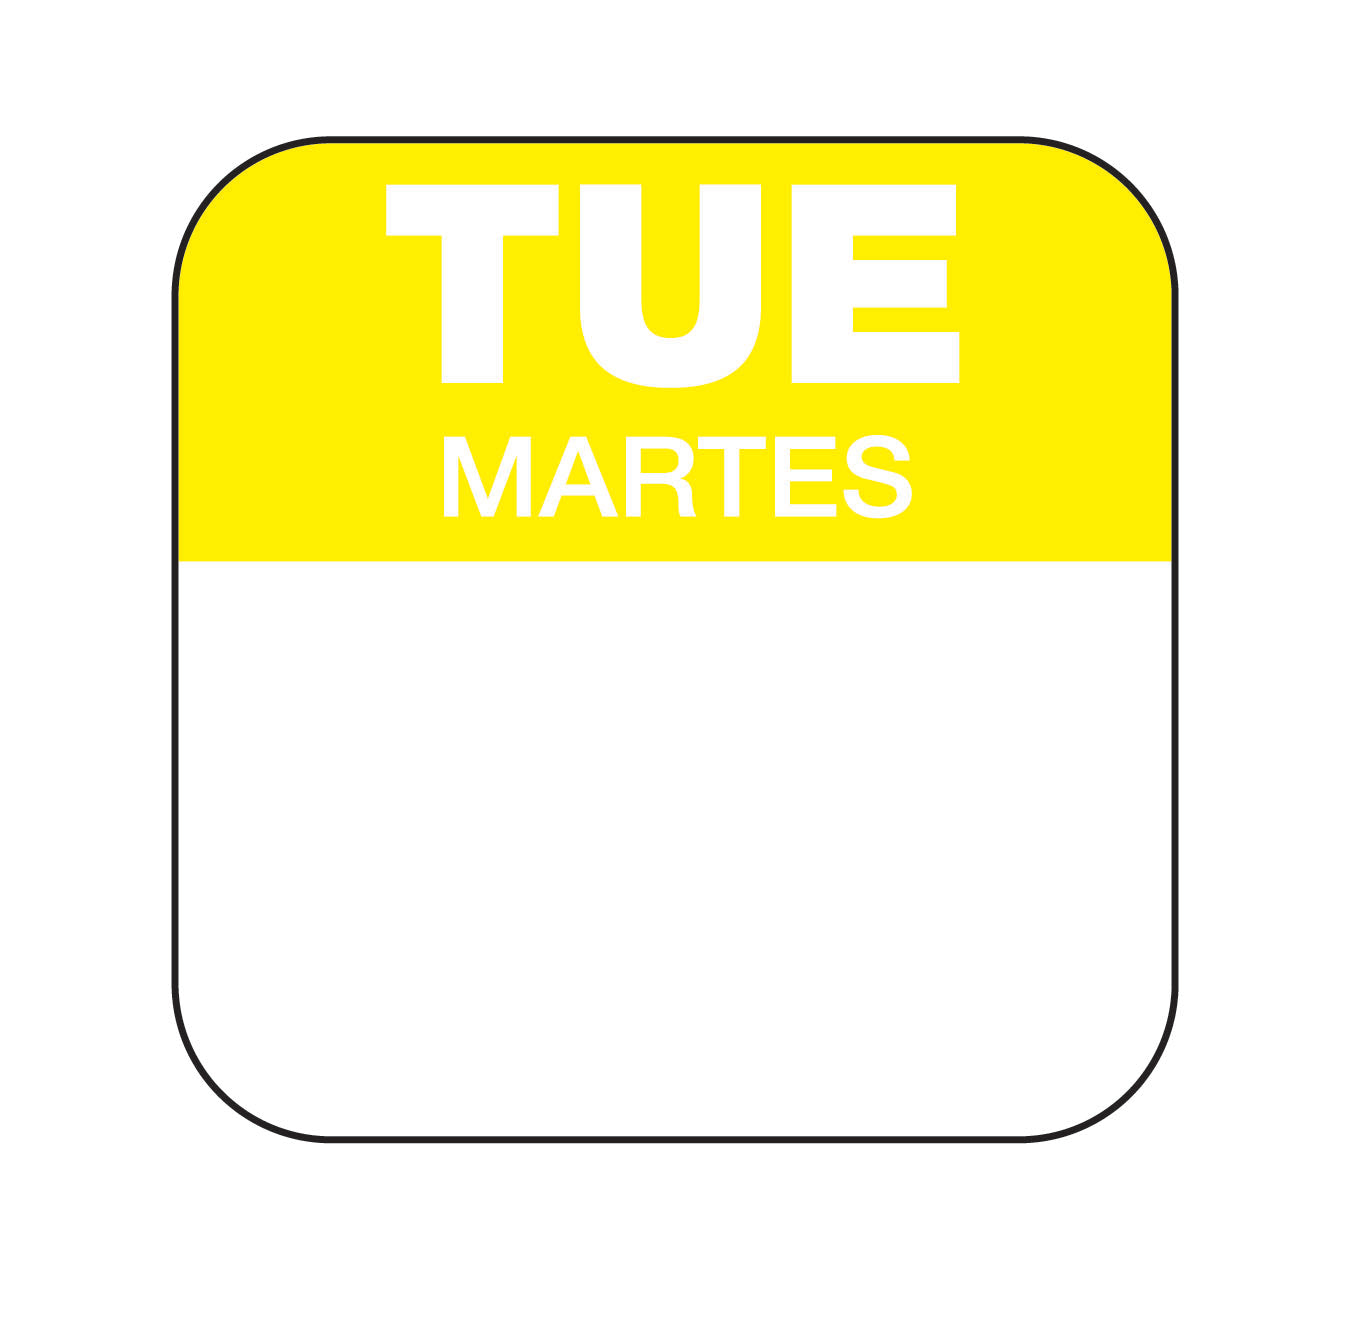 Tuesday - Martes 1" x 1" Removable Day of the Week Date Label